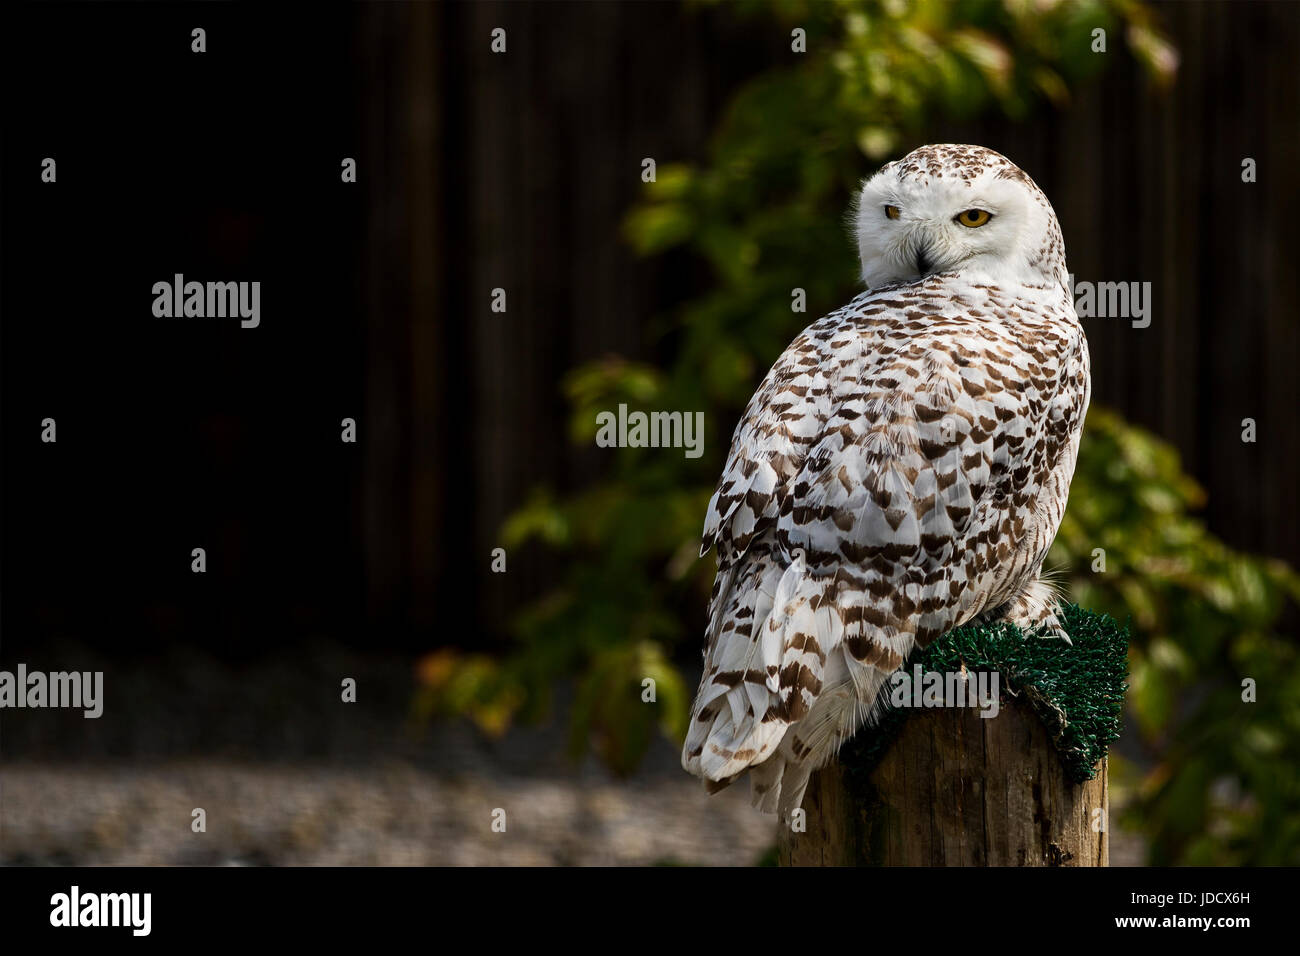 A Snowy owl looking around while on his perch Stock Photo